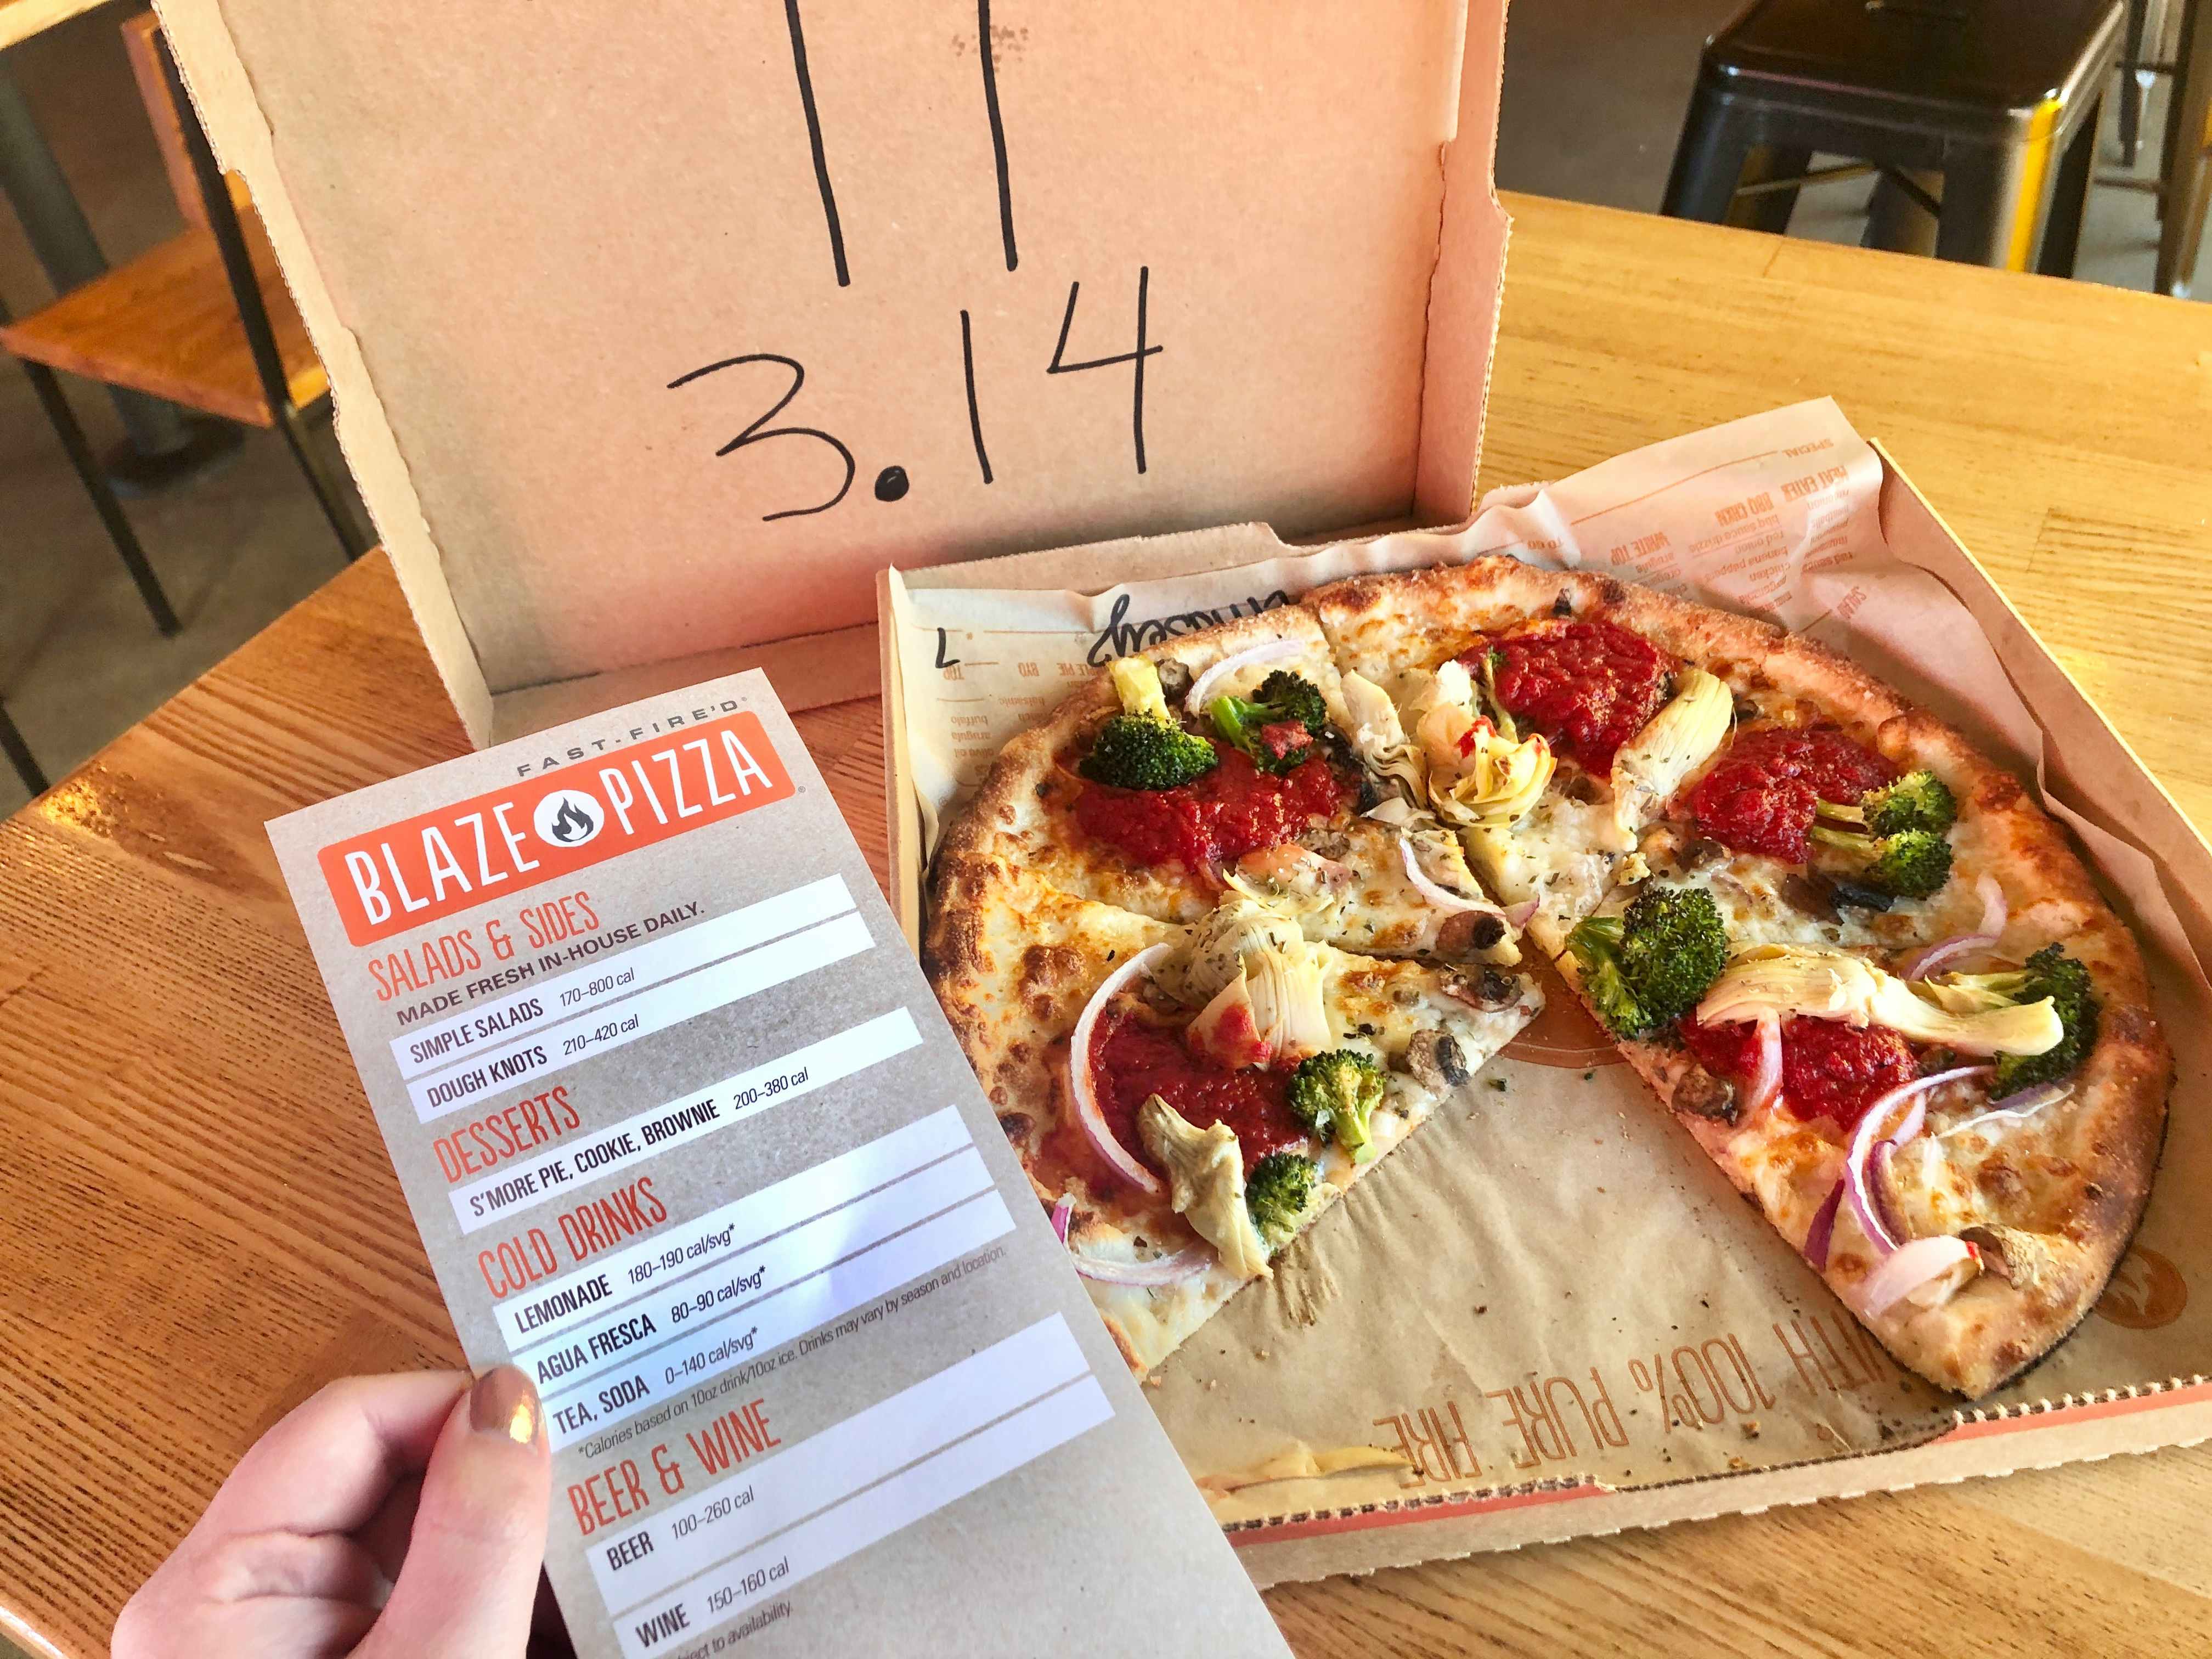 A person's hand holding the Blaze Pizza menu up in front of a pizza sitting on a table in a box with no top. The top is displayed in the background with the Pi symbol and 